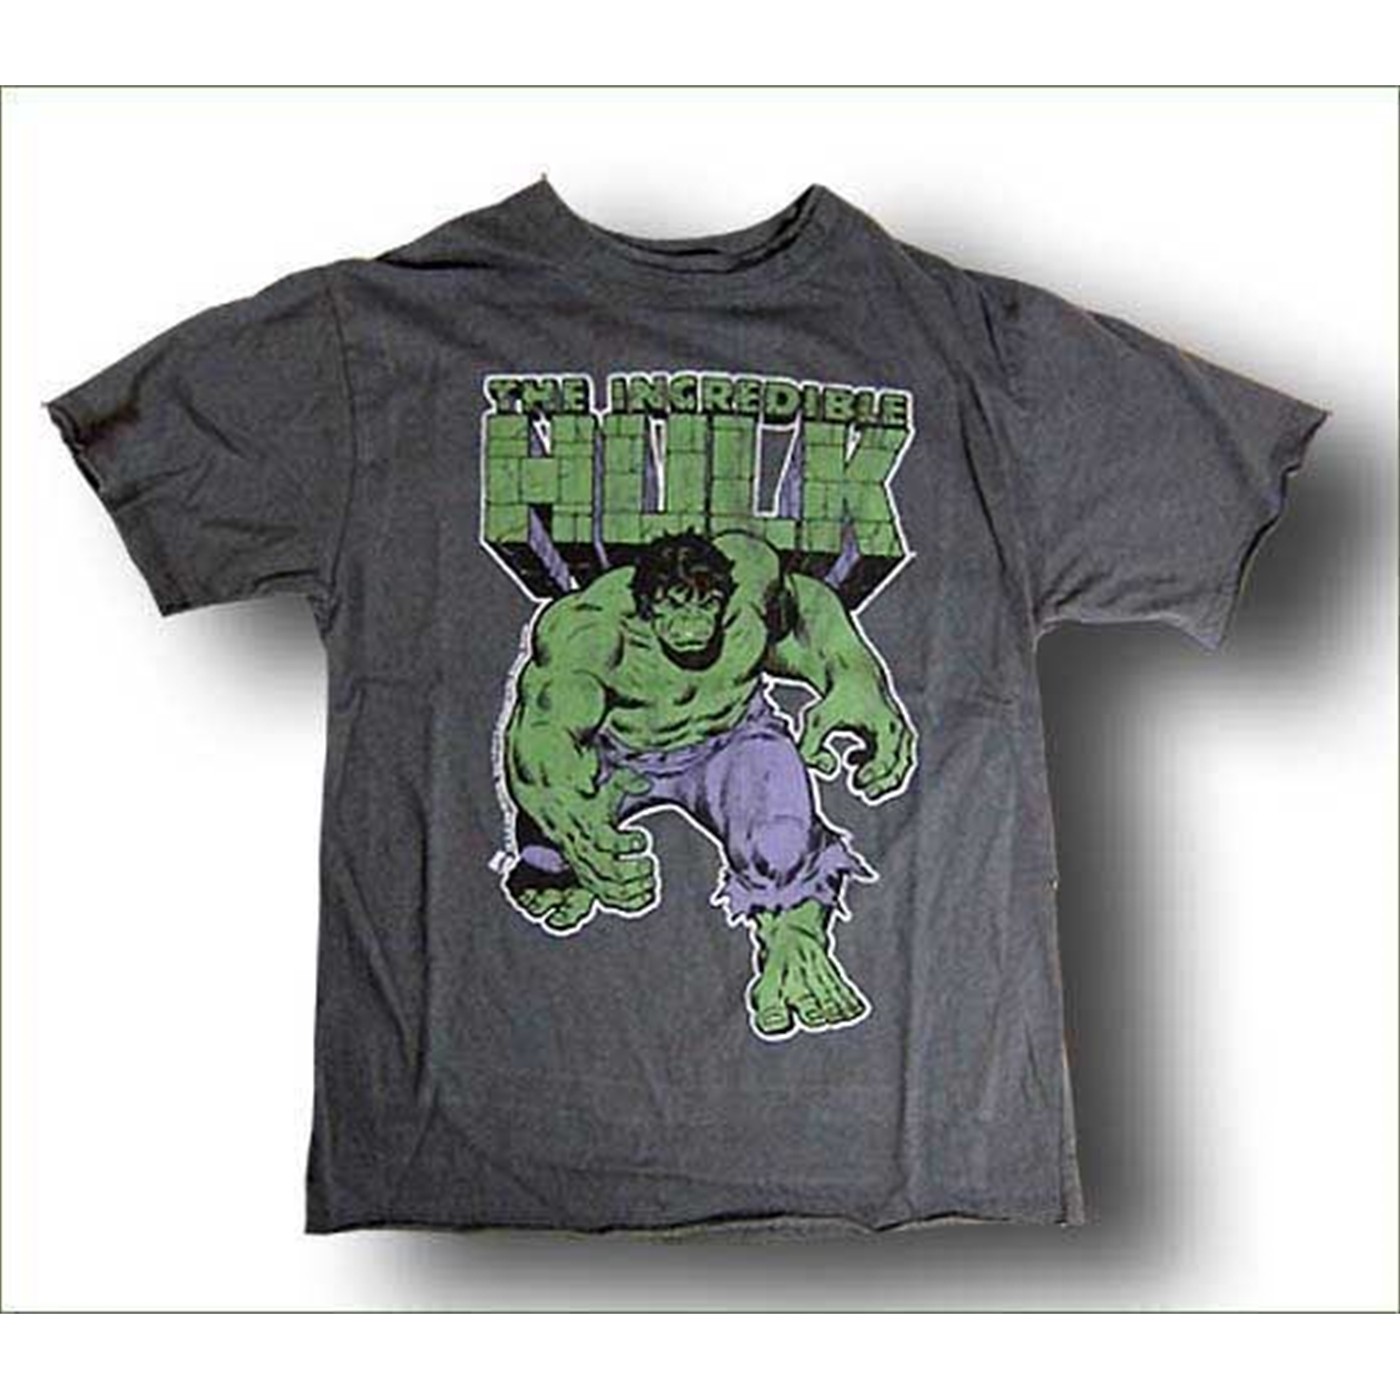 The Hulk Infant T-Shirt by Junk Food